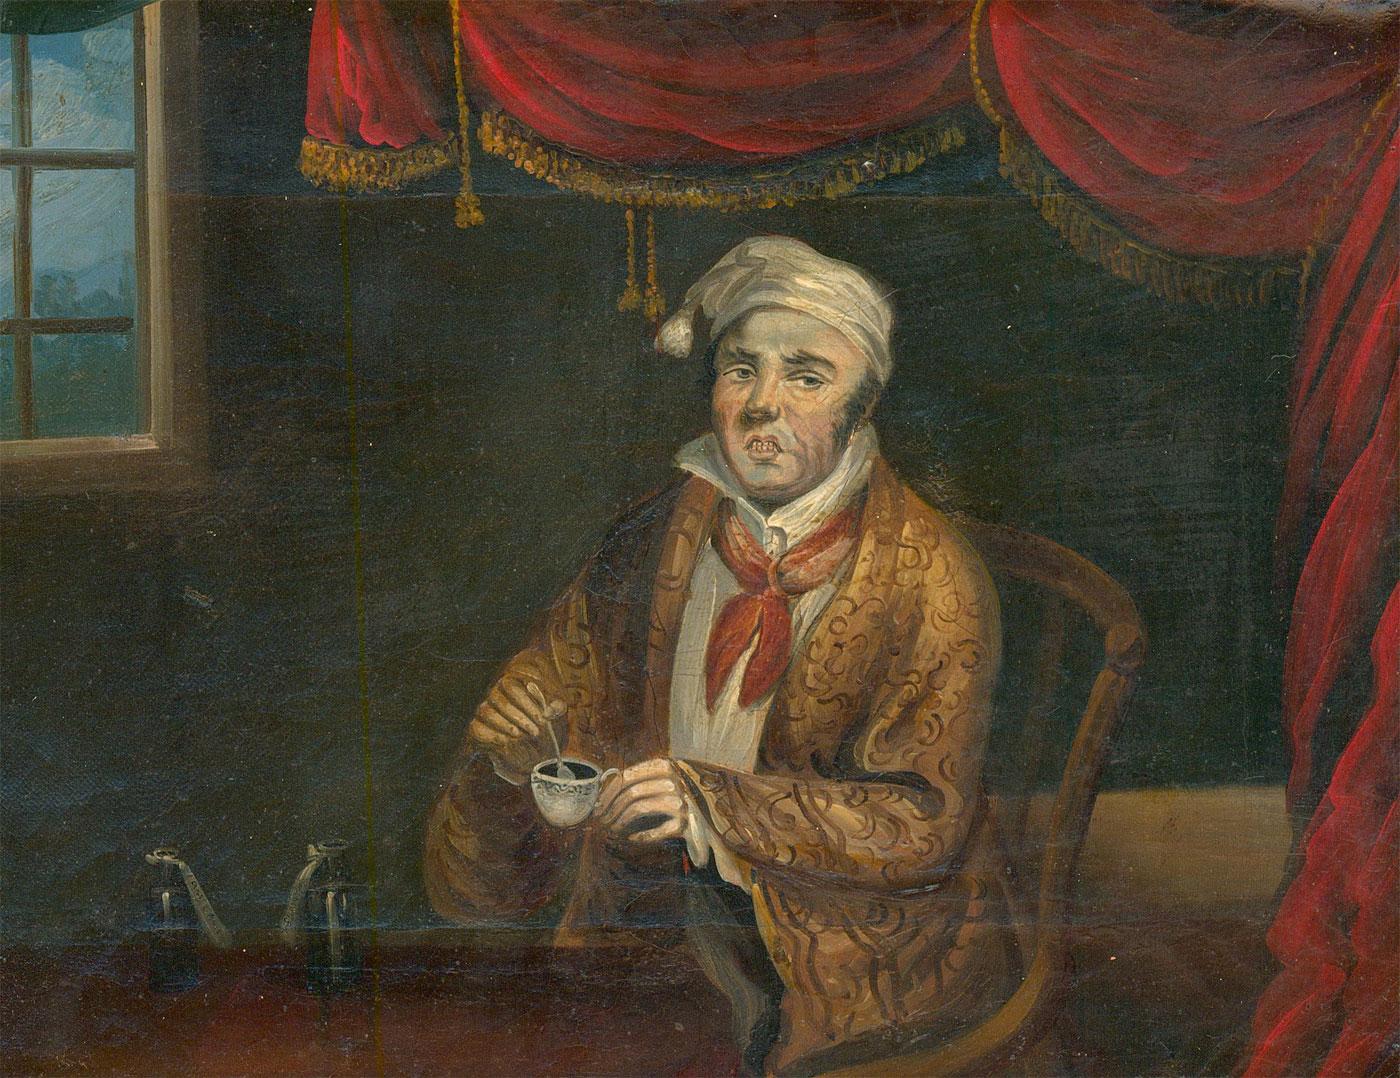 A charismatic interior scene depicting a gentleman nursing a cup of tea while still in his nightcap. The painting is a pair to a similar scene in which the man can be seen drinking into the night. The artist captures the man in his long night robes